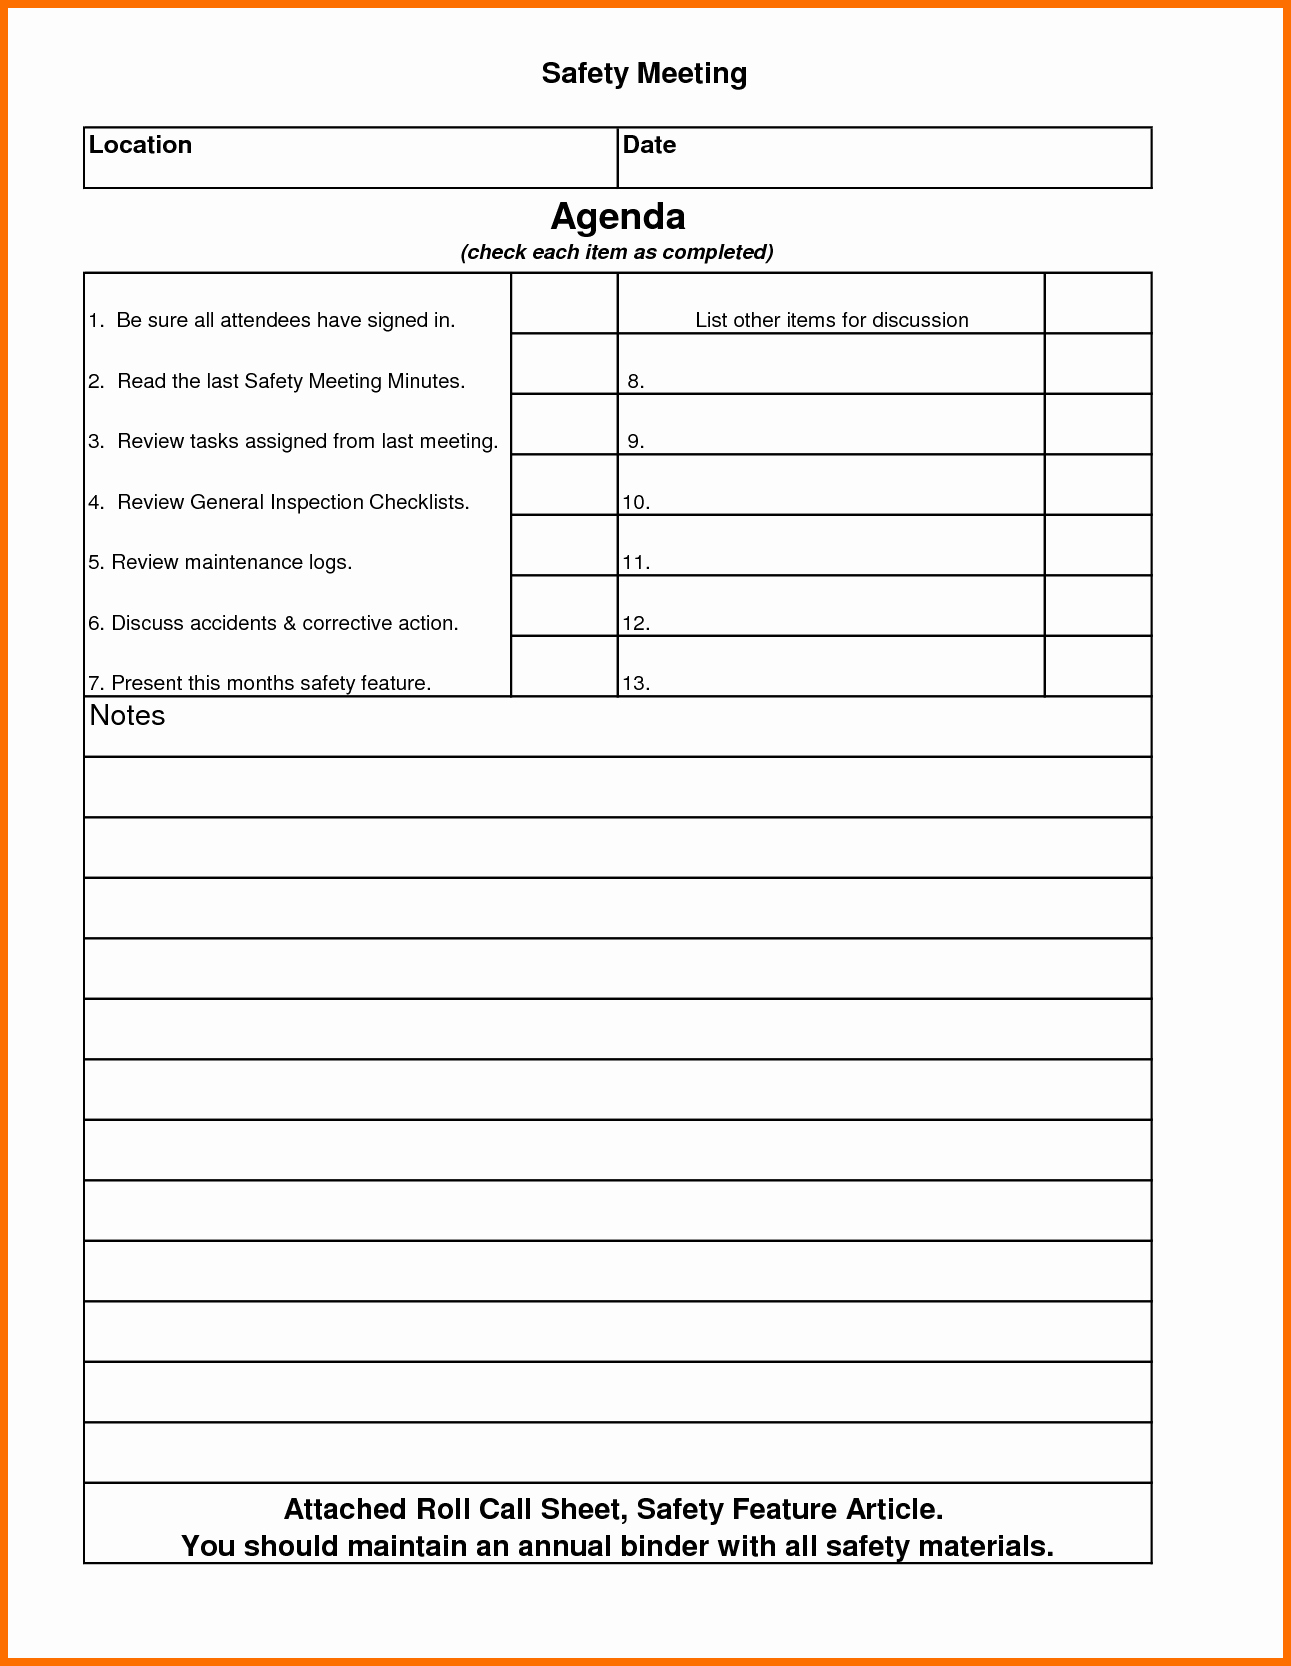 Safety Meeting Sign Off Sheet Beautiful attendance Sign In Sheet Example Mughals